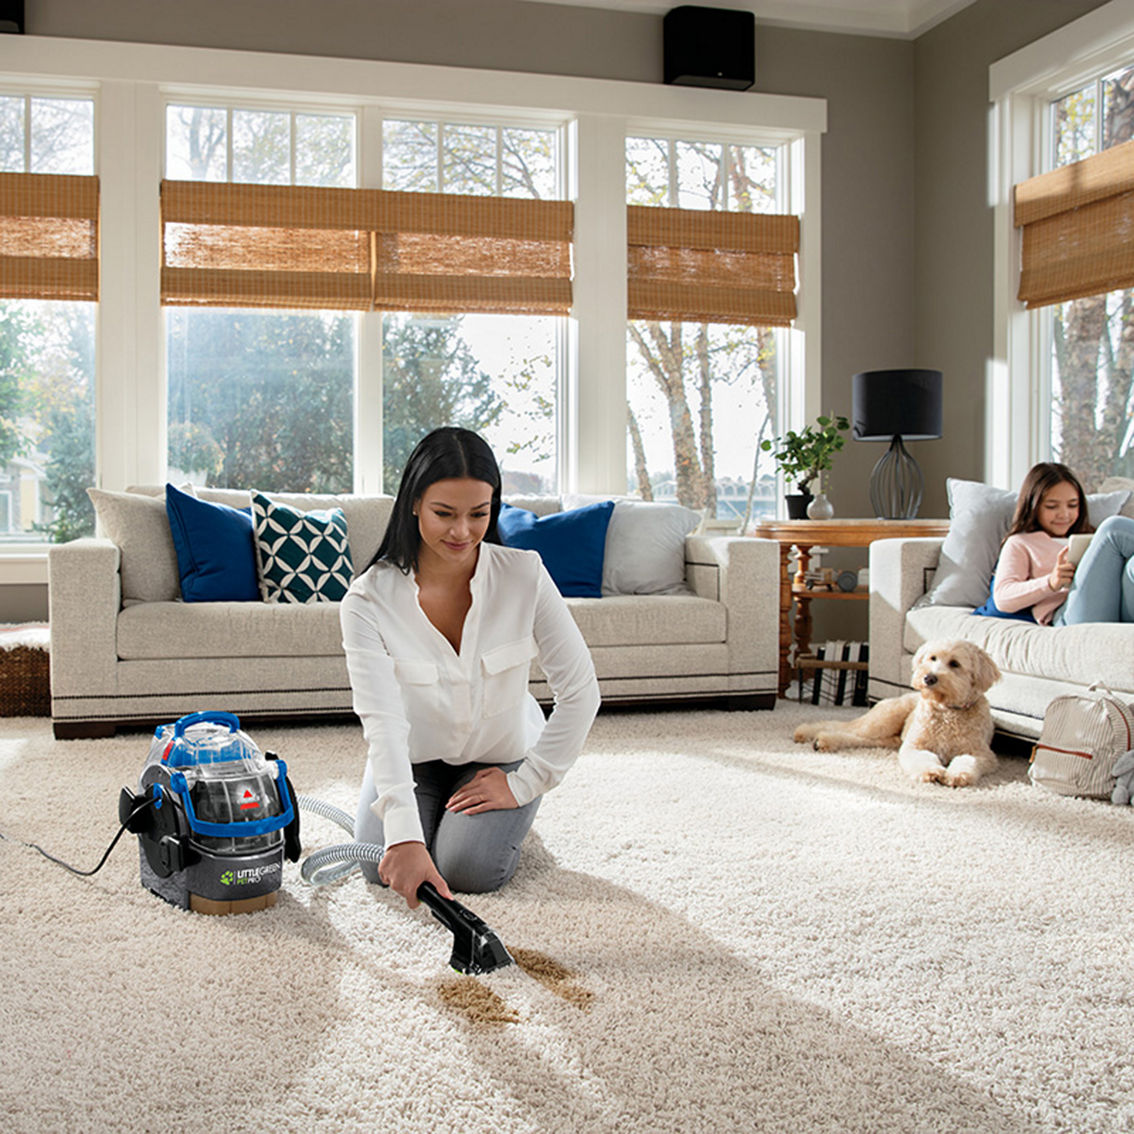 Bissell Little Green Pro Pet Portable Carpet Cleaner - Image 3 of 7